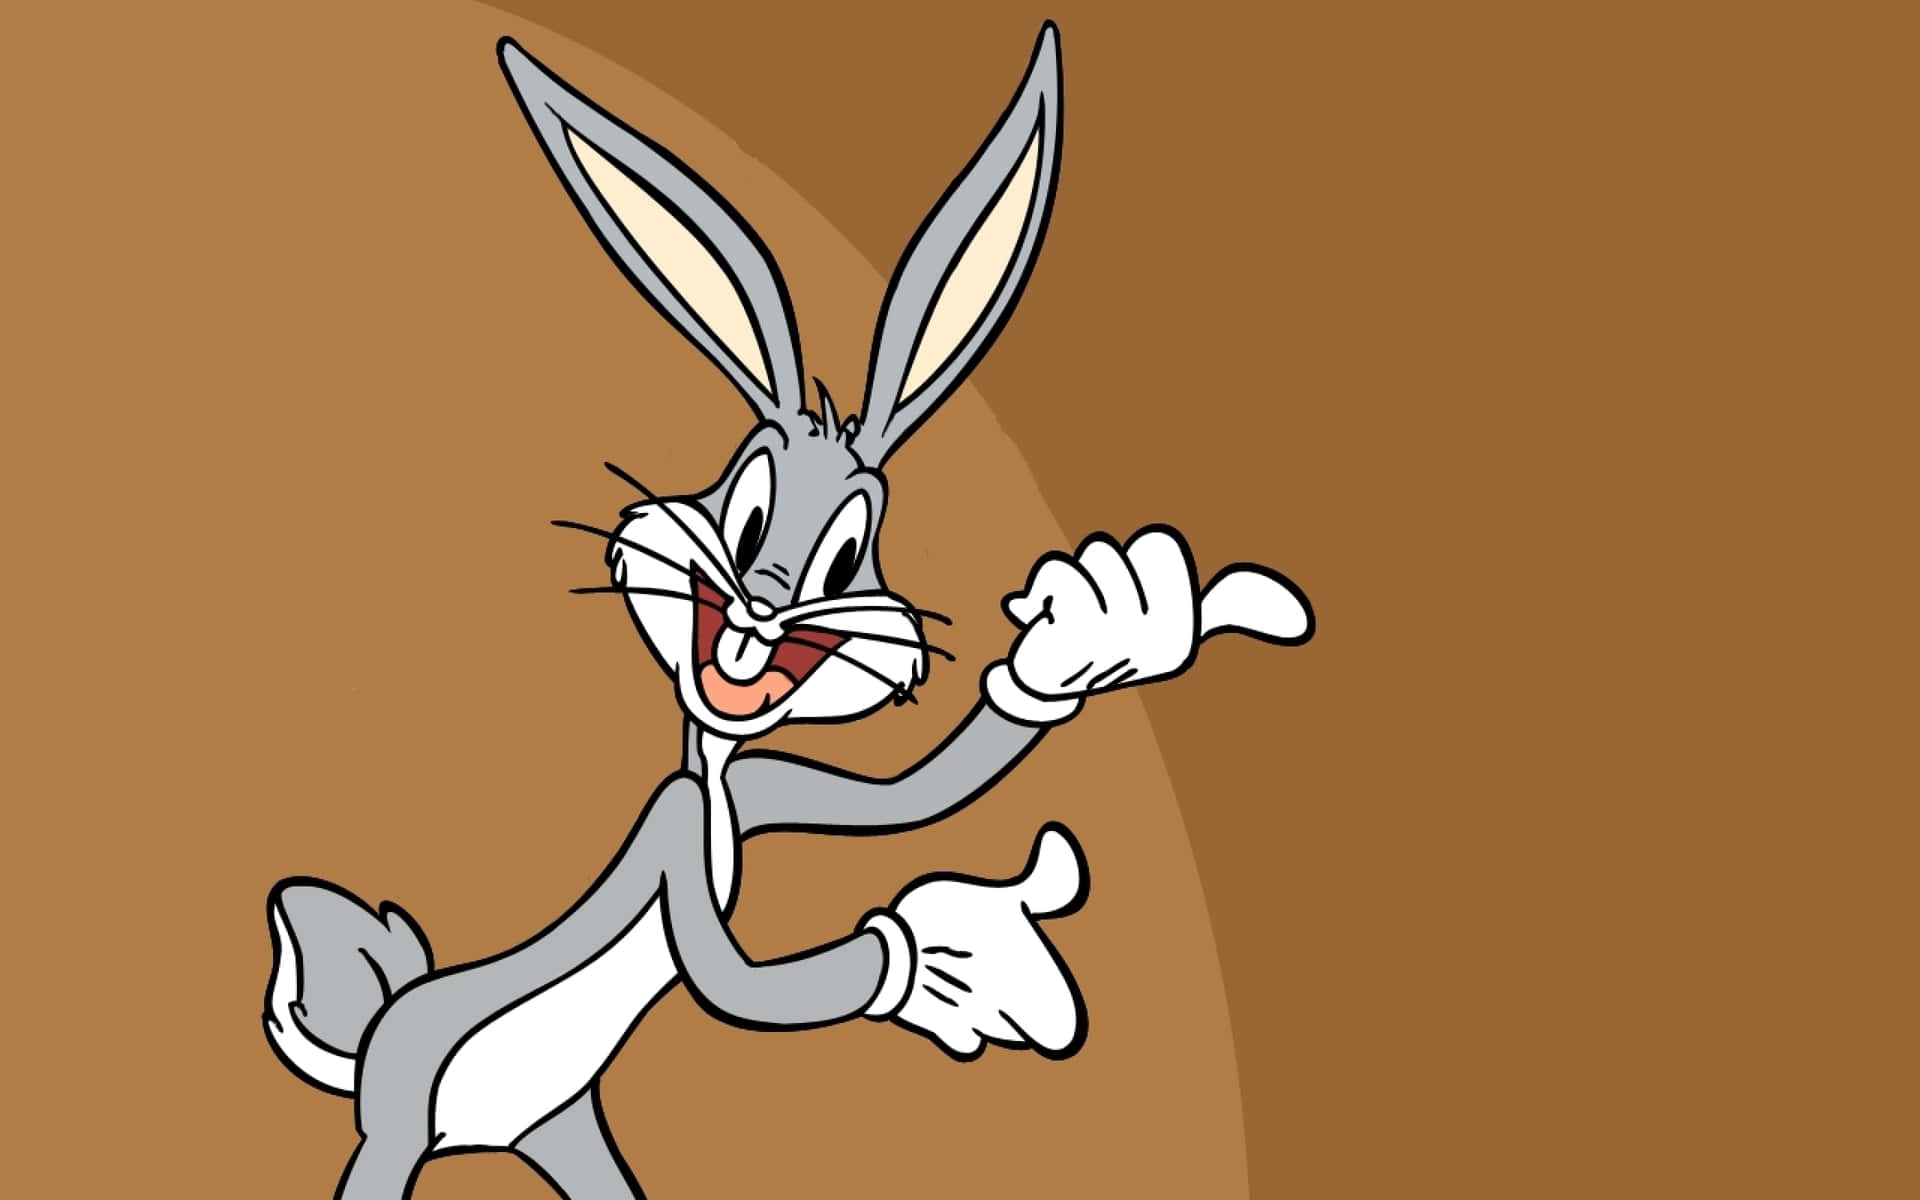 Bugs Bunny is Here to Make You Laugh